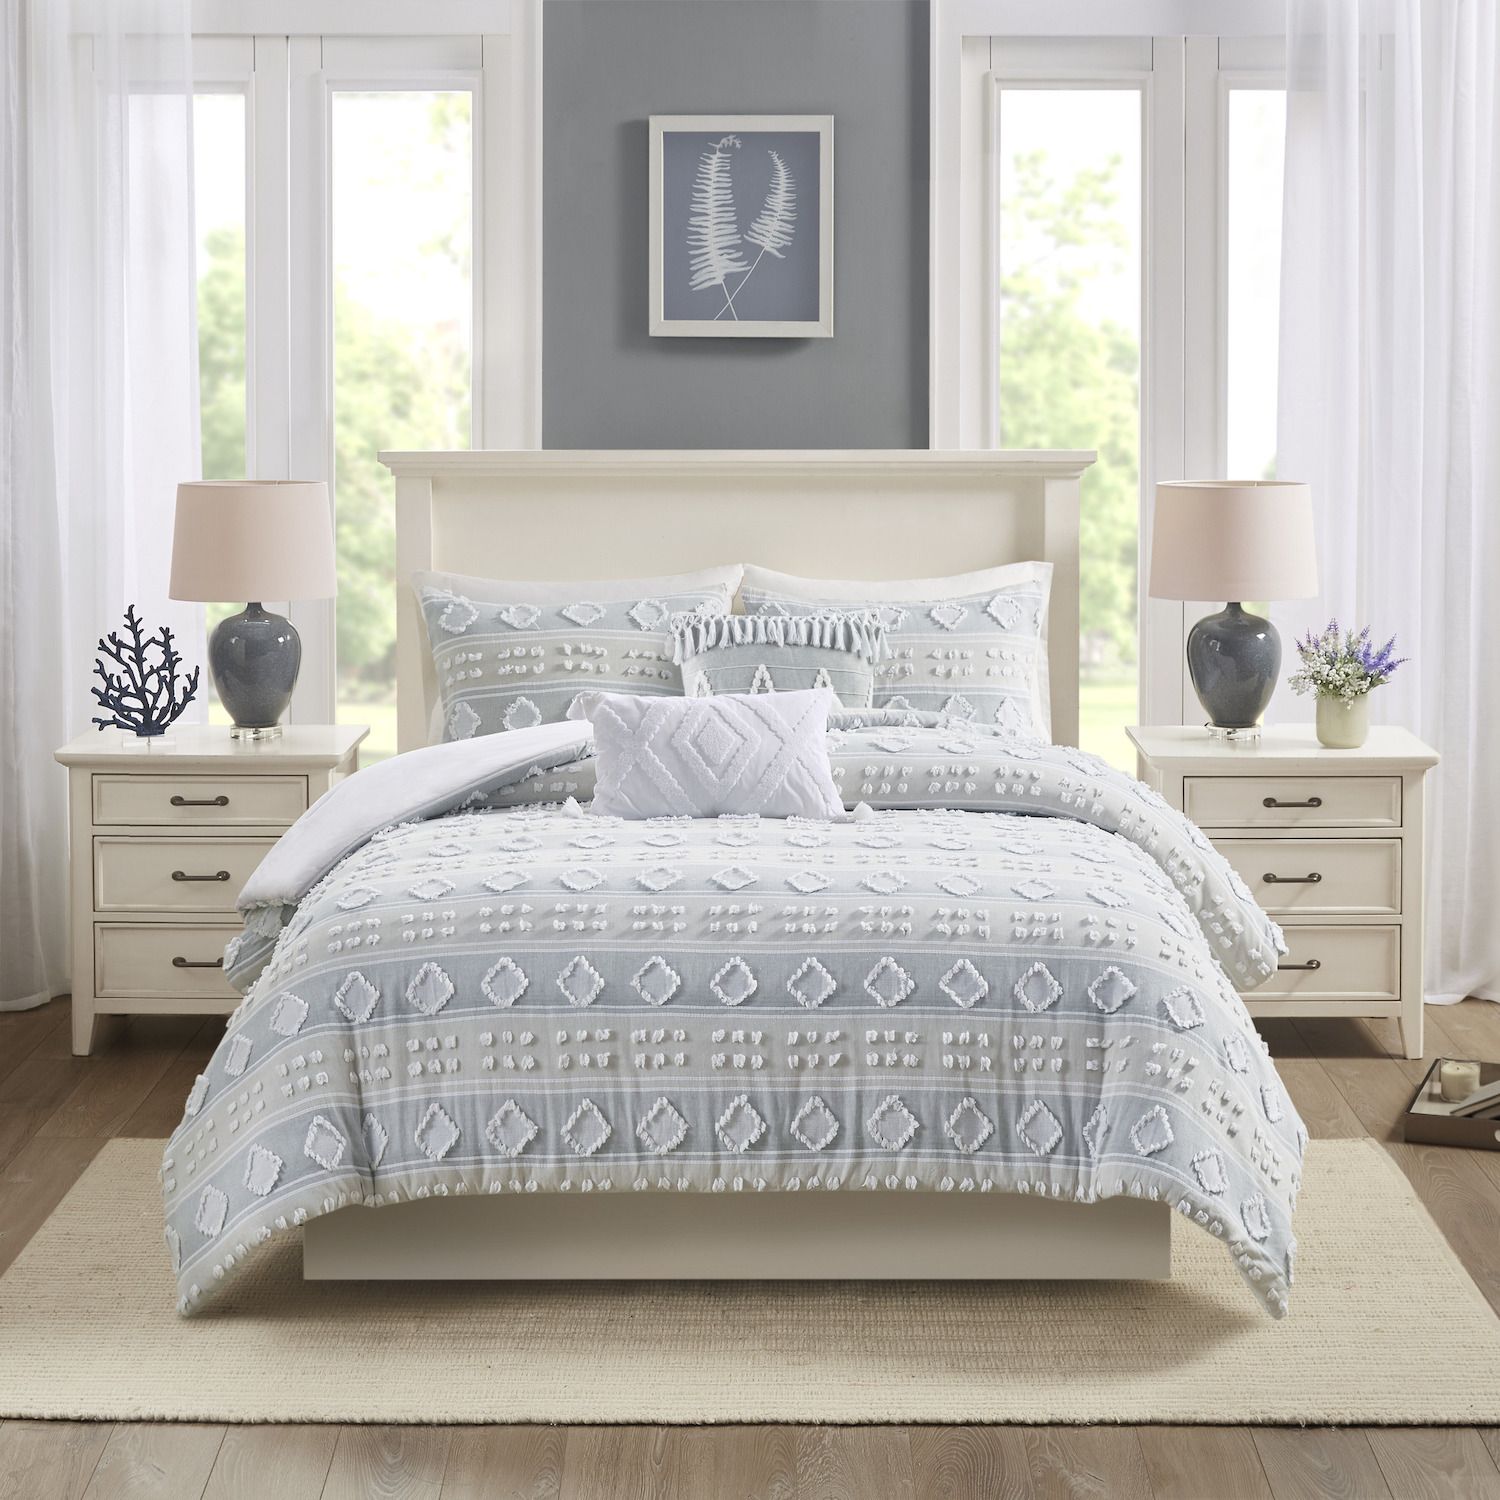 Image for Harbor House Brice Clipped Jacquard 5-piece Duvet Cover Set with Shams at Kohl's.